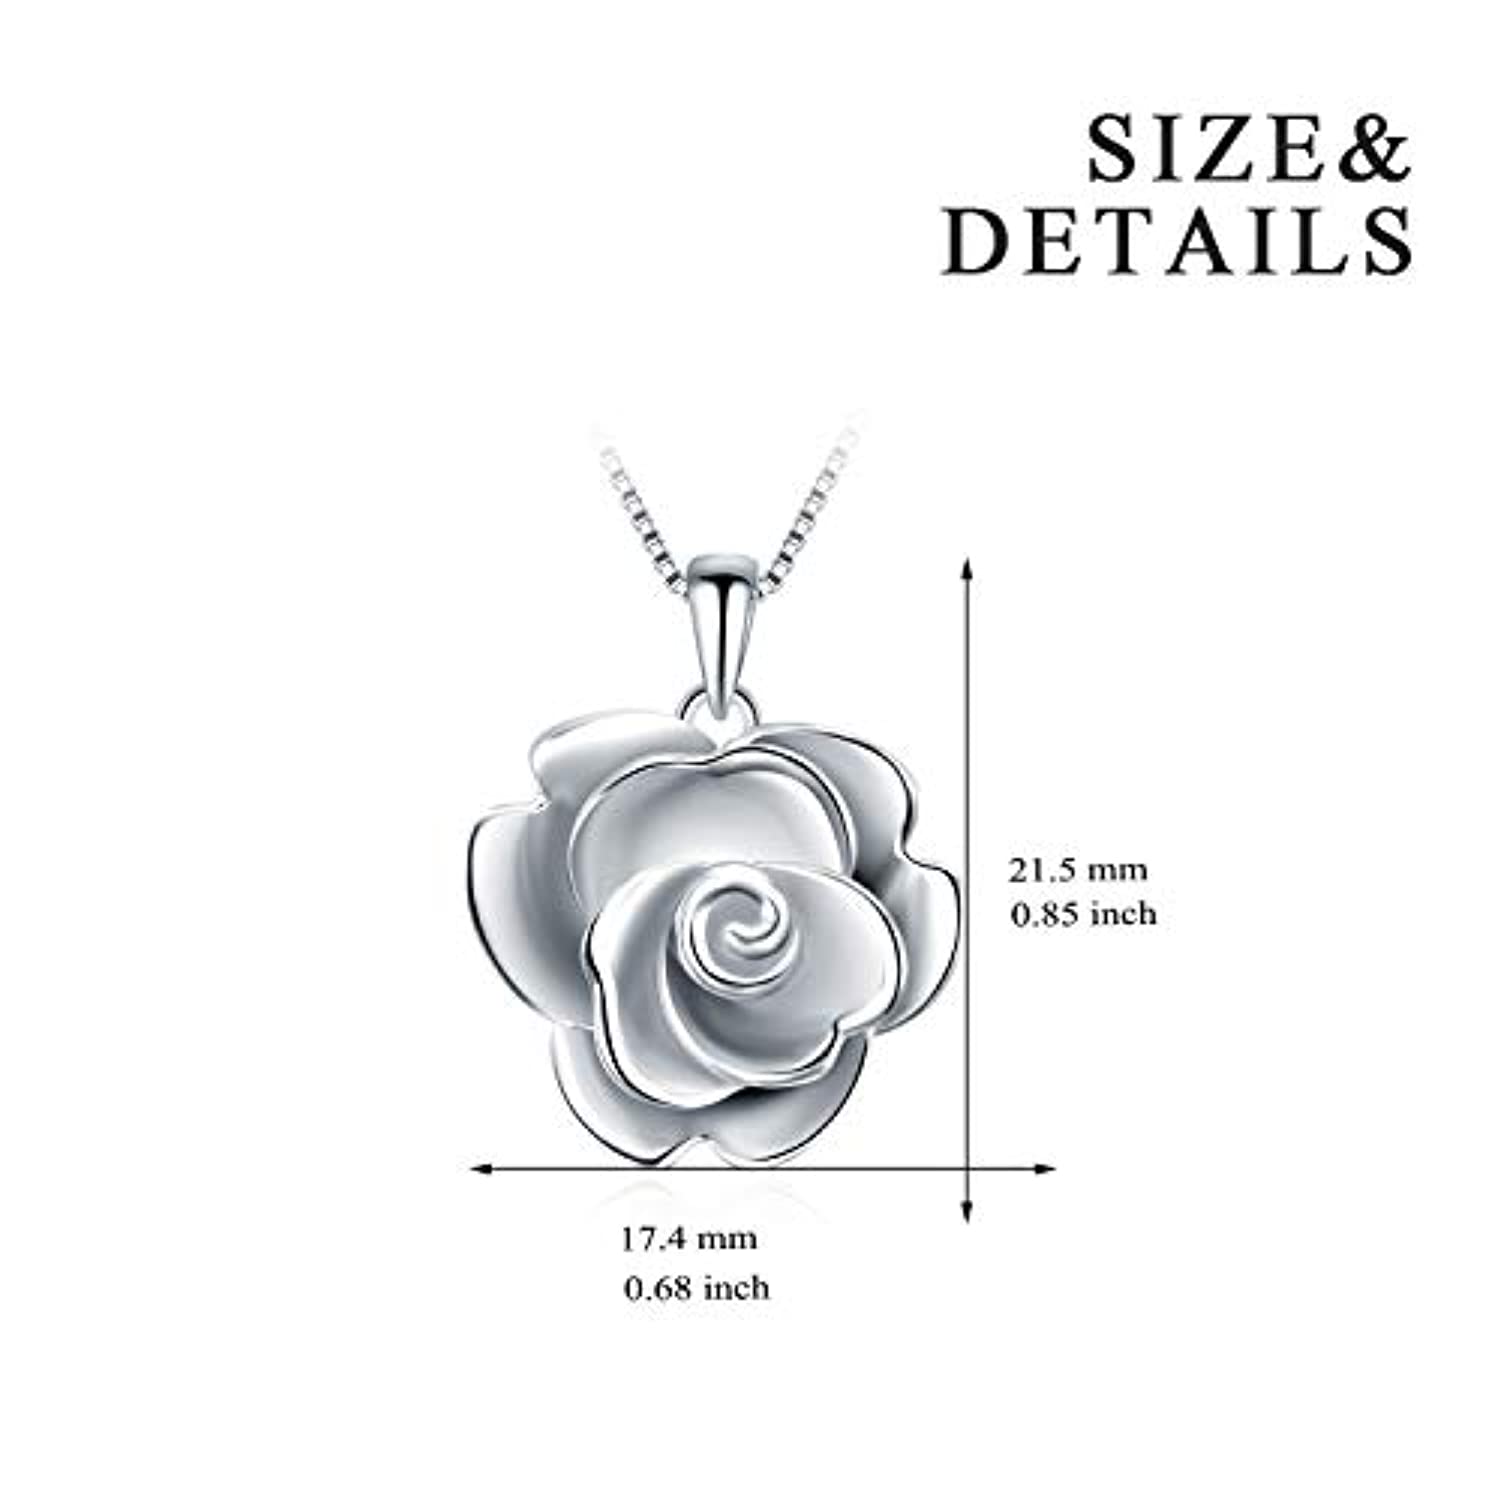 925 Sterling Silver Rose Flower Necklace for Mom Girlfriend Wife Sisters